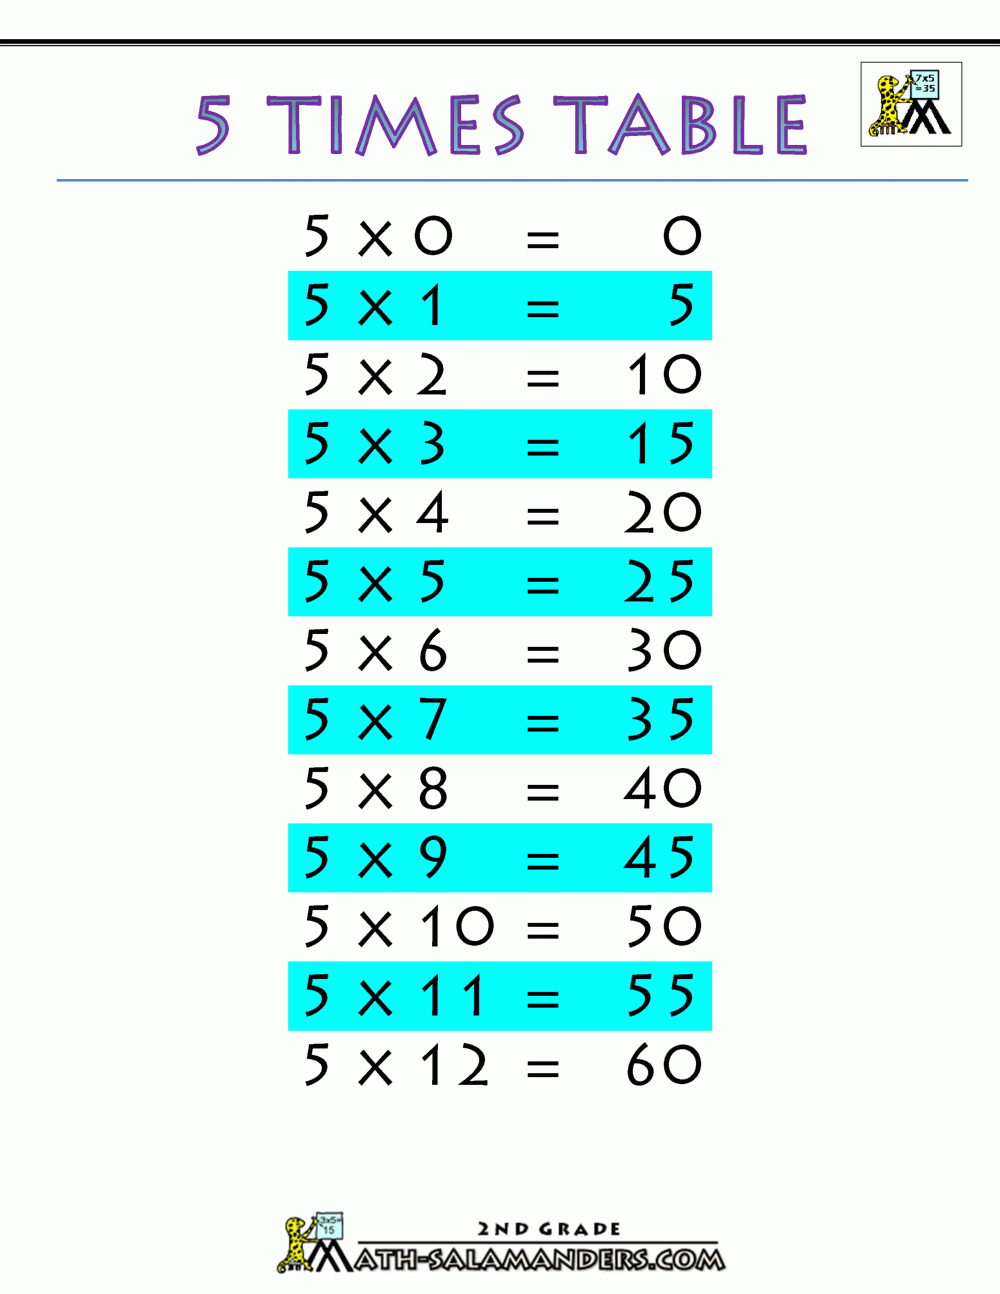 Multiplication Facts For 5